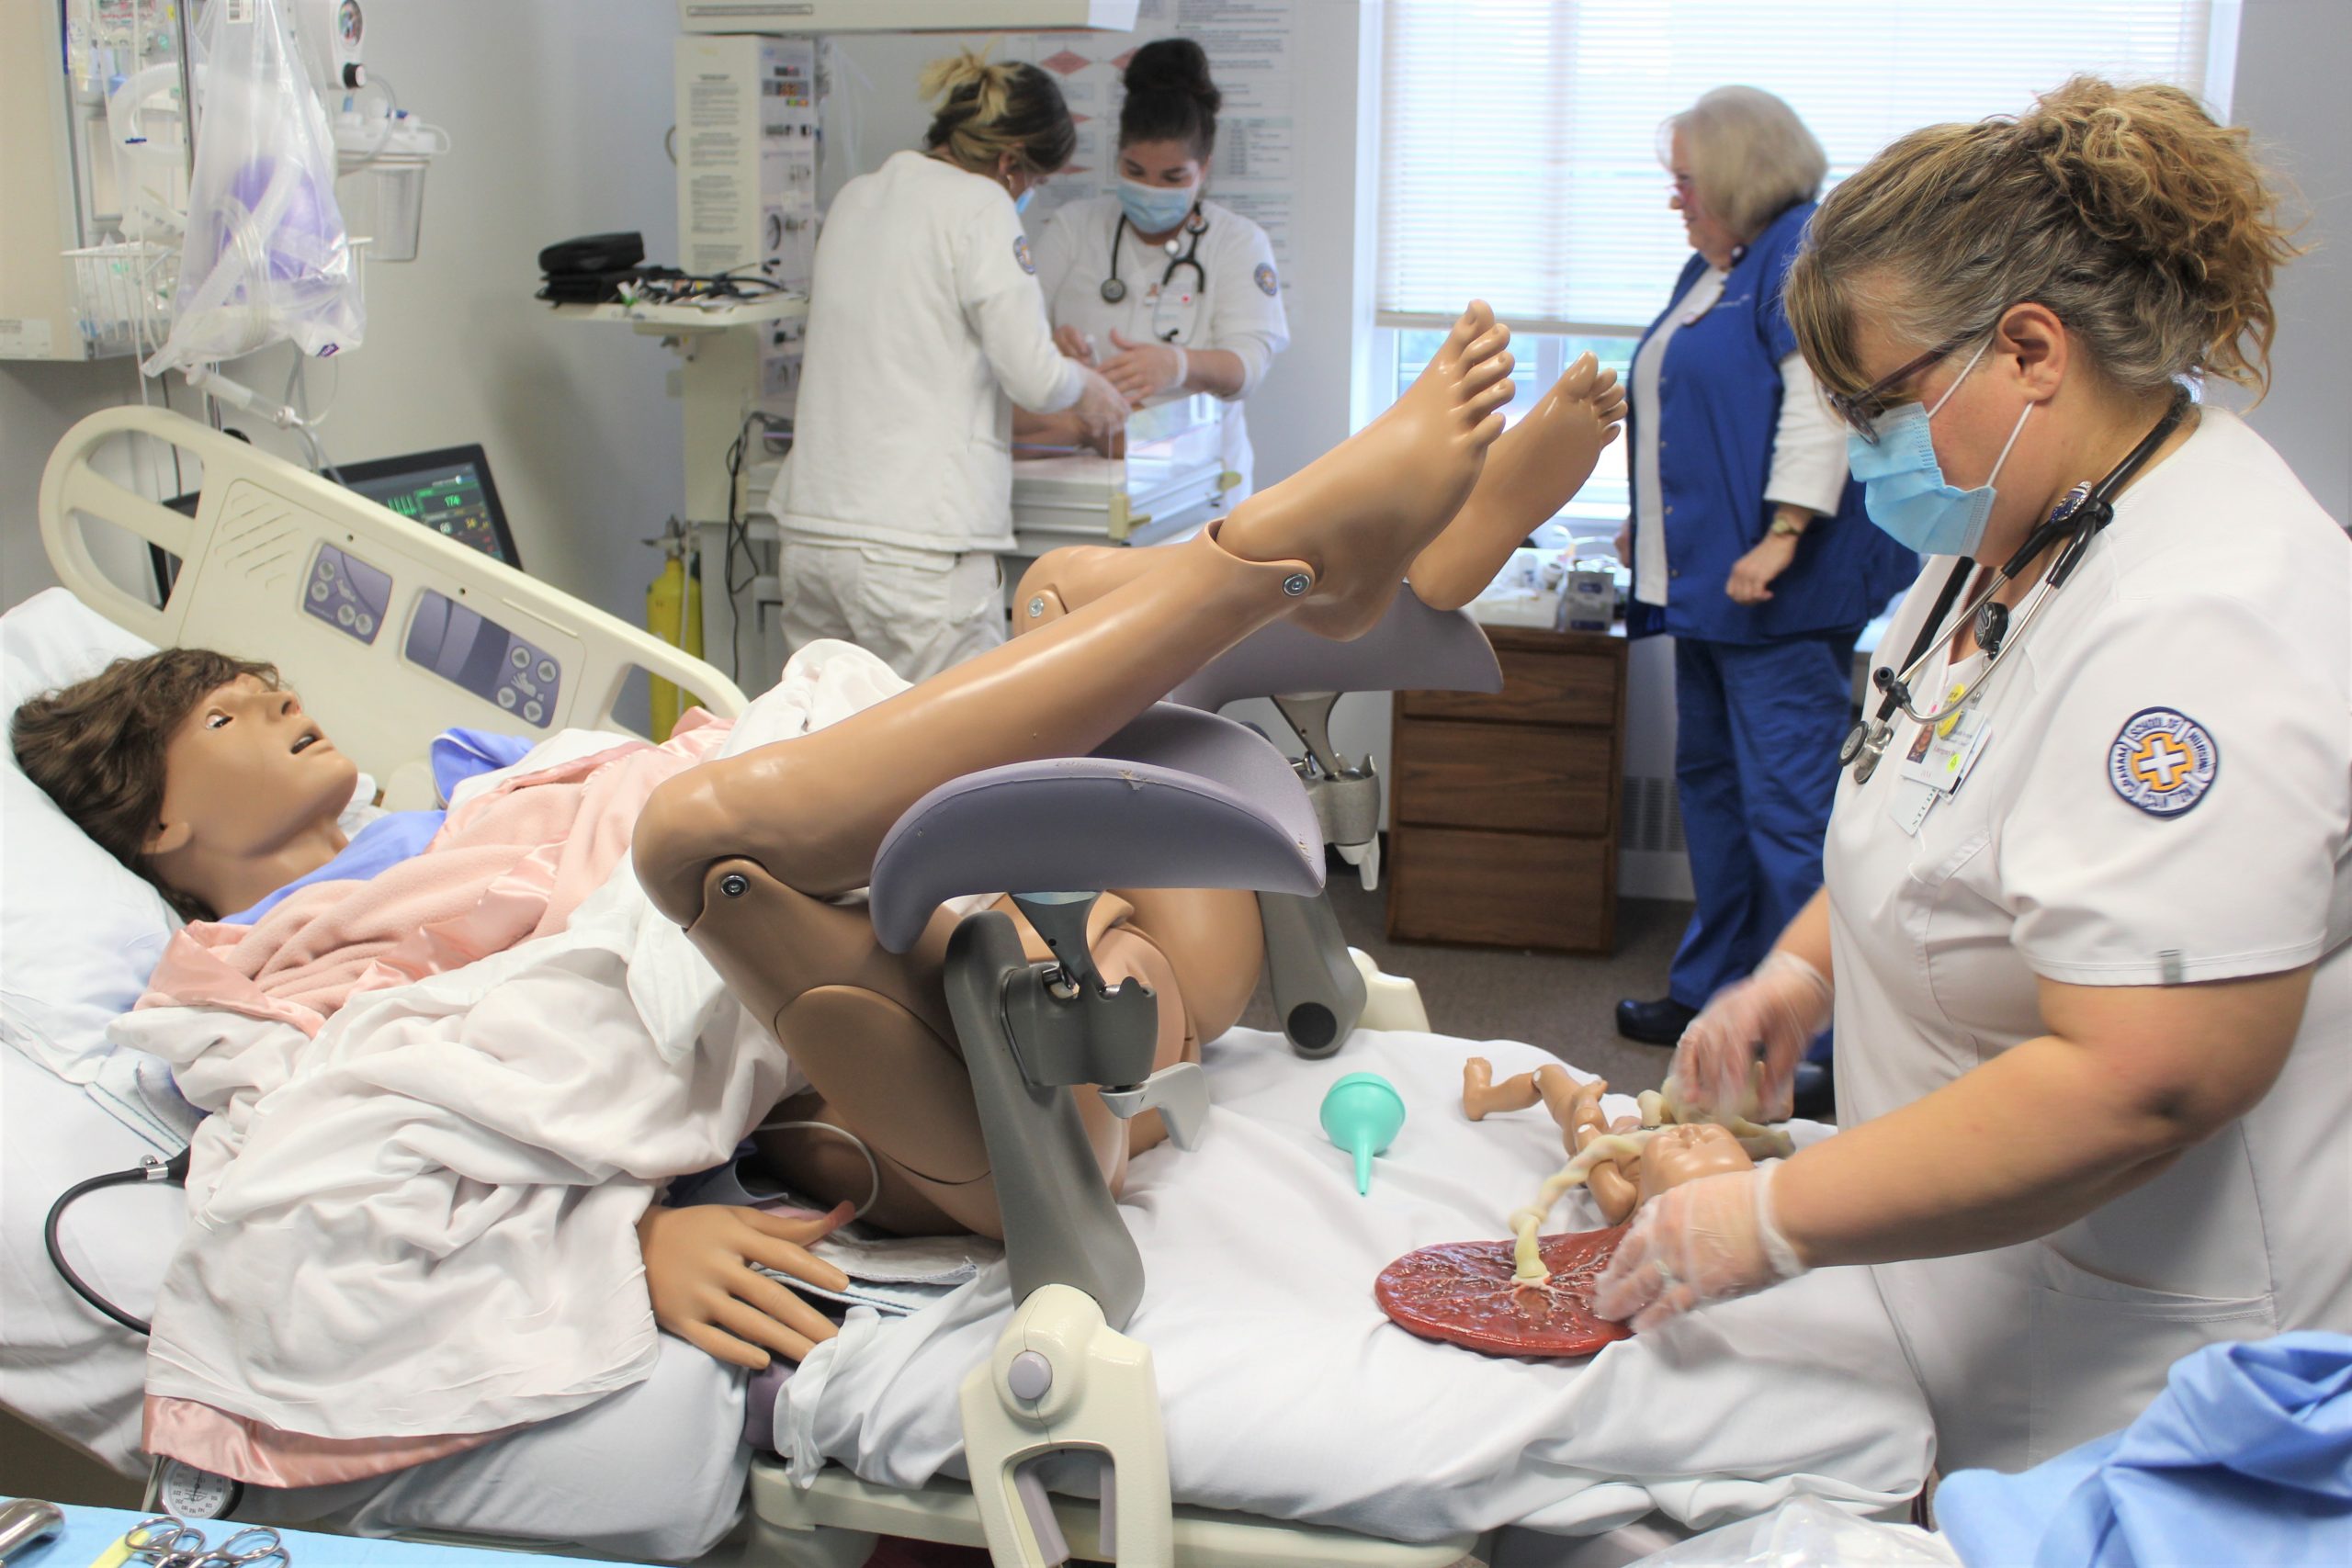 Birthing simulator helps nursing students get labor and delivery experience  During COVID